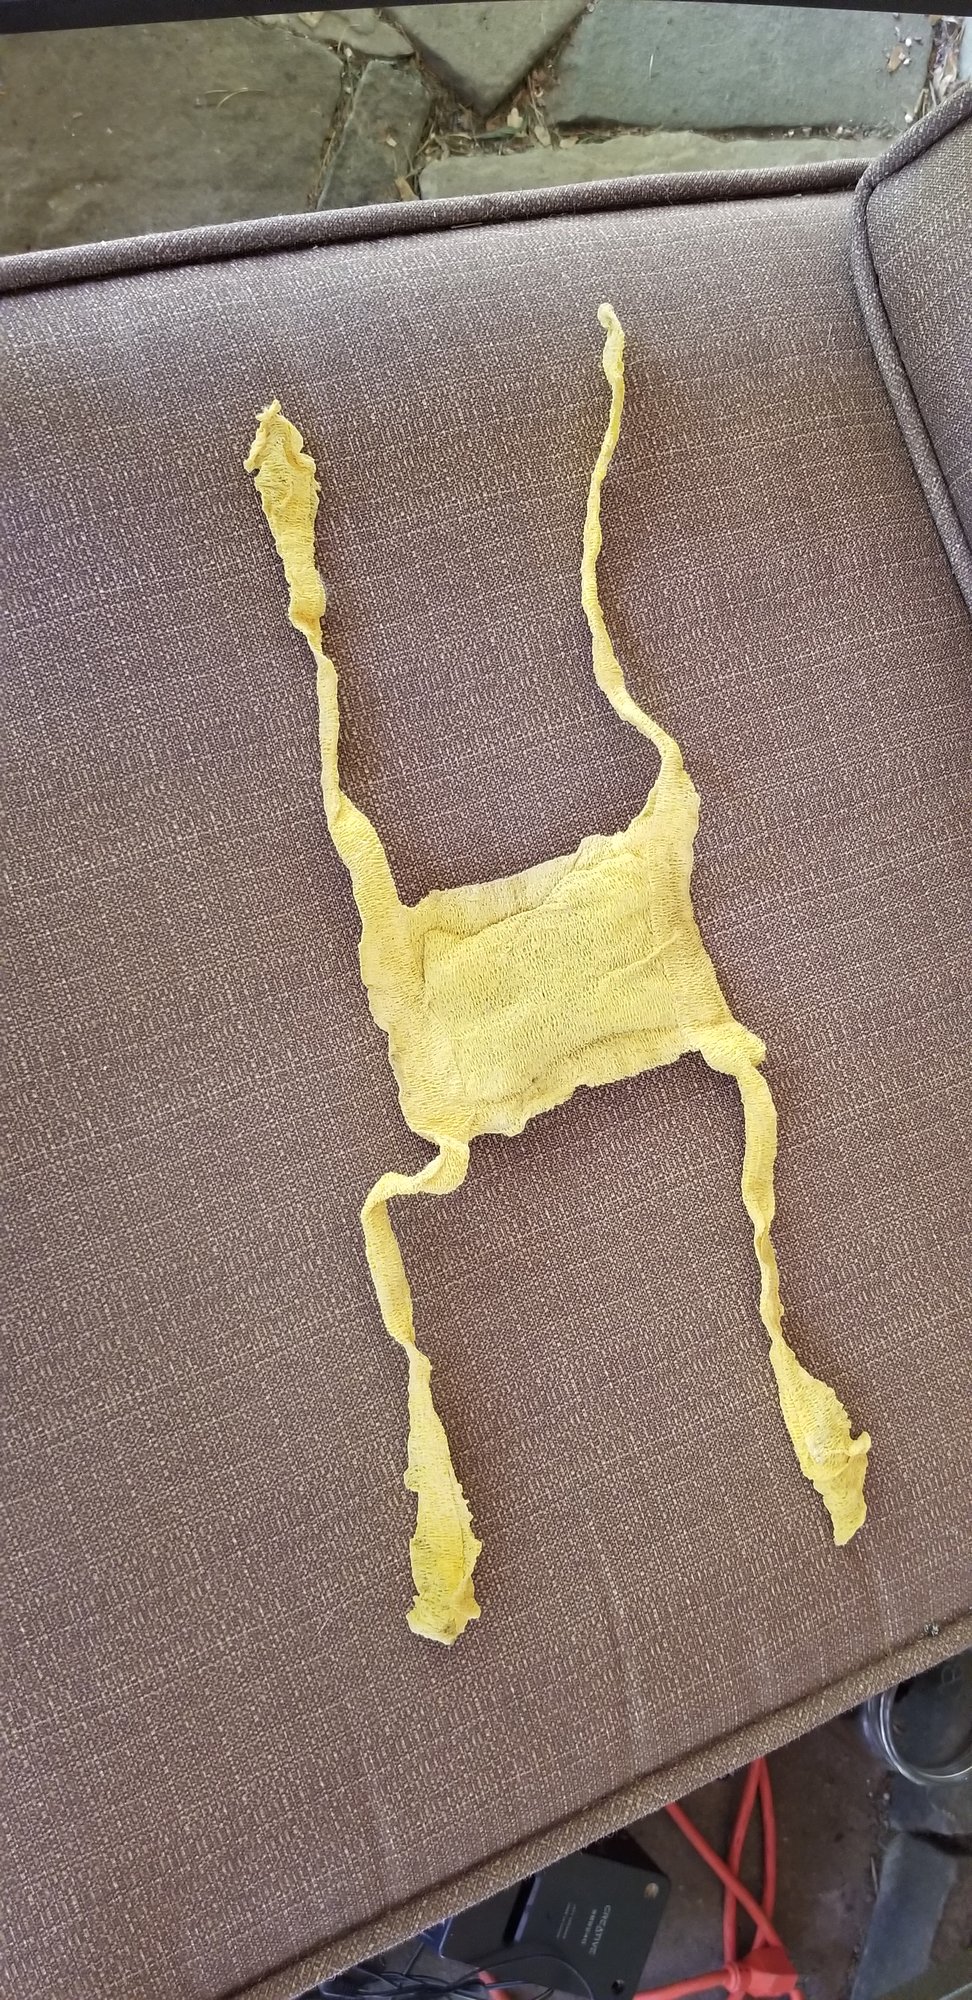 How to make a chicken bra from less than 4 feet of vet wrap